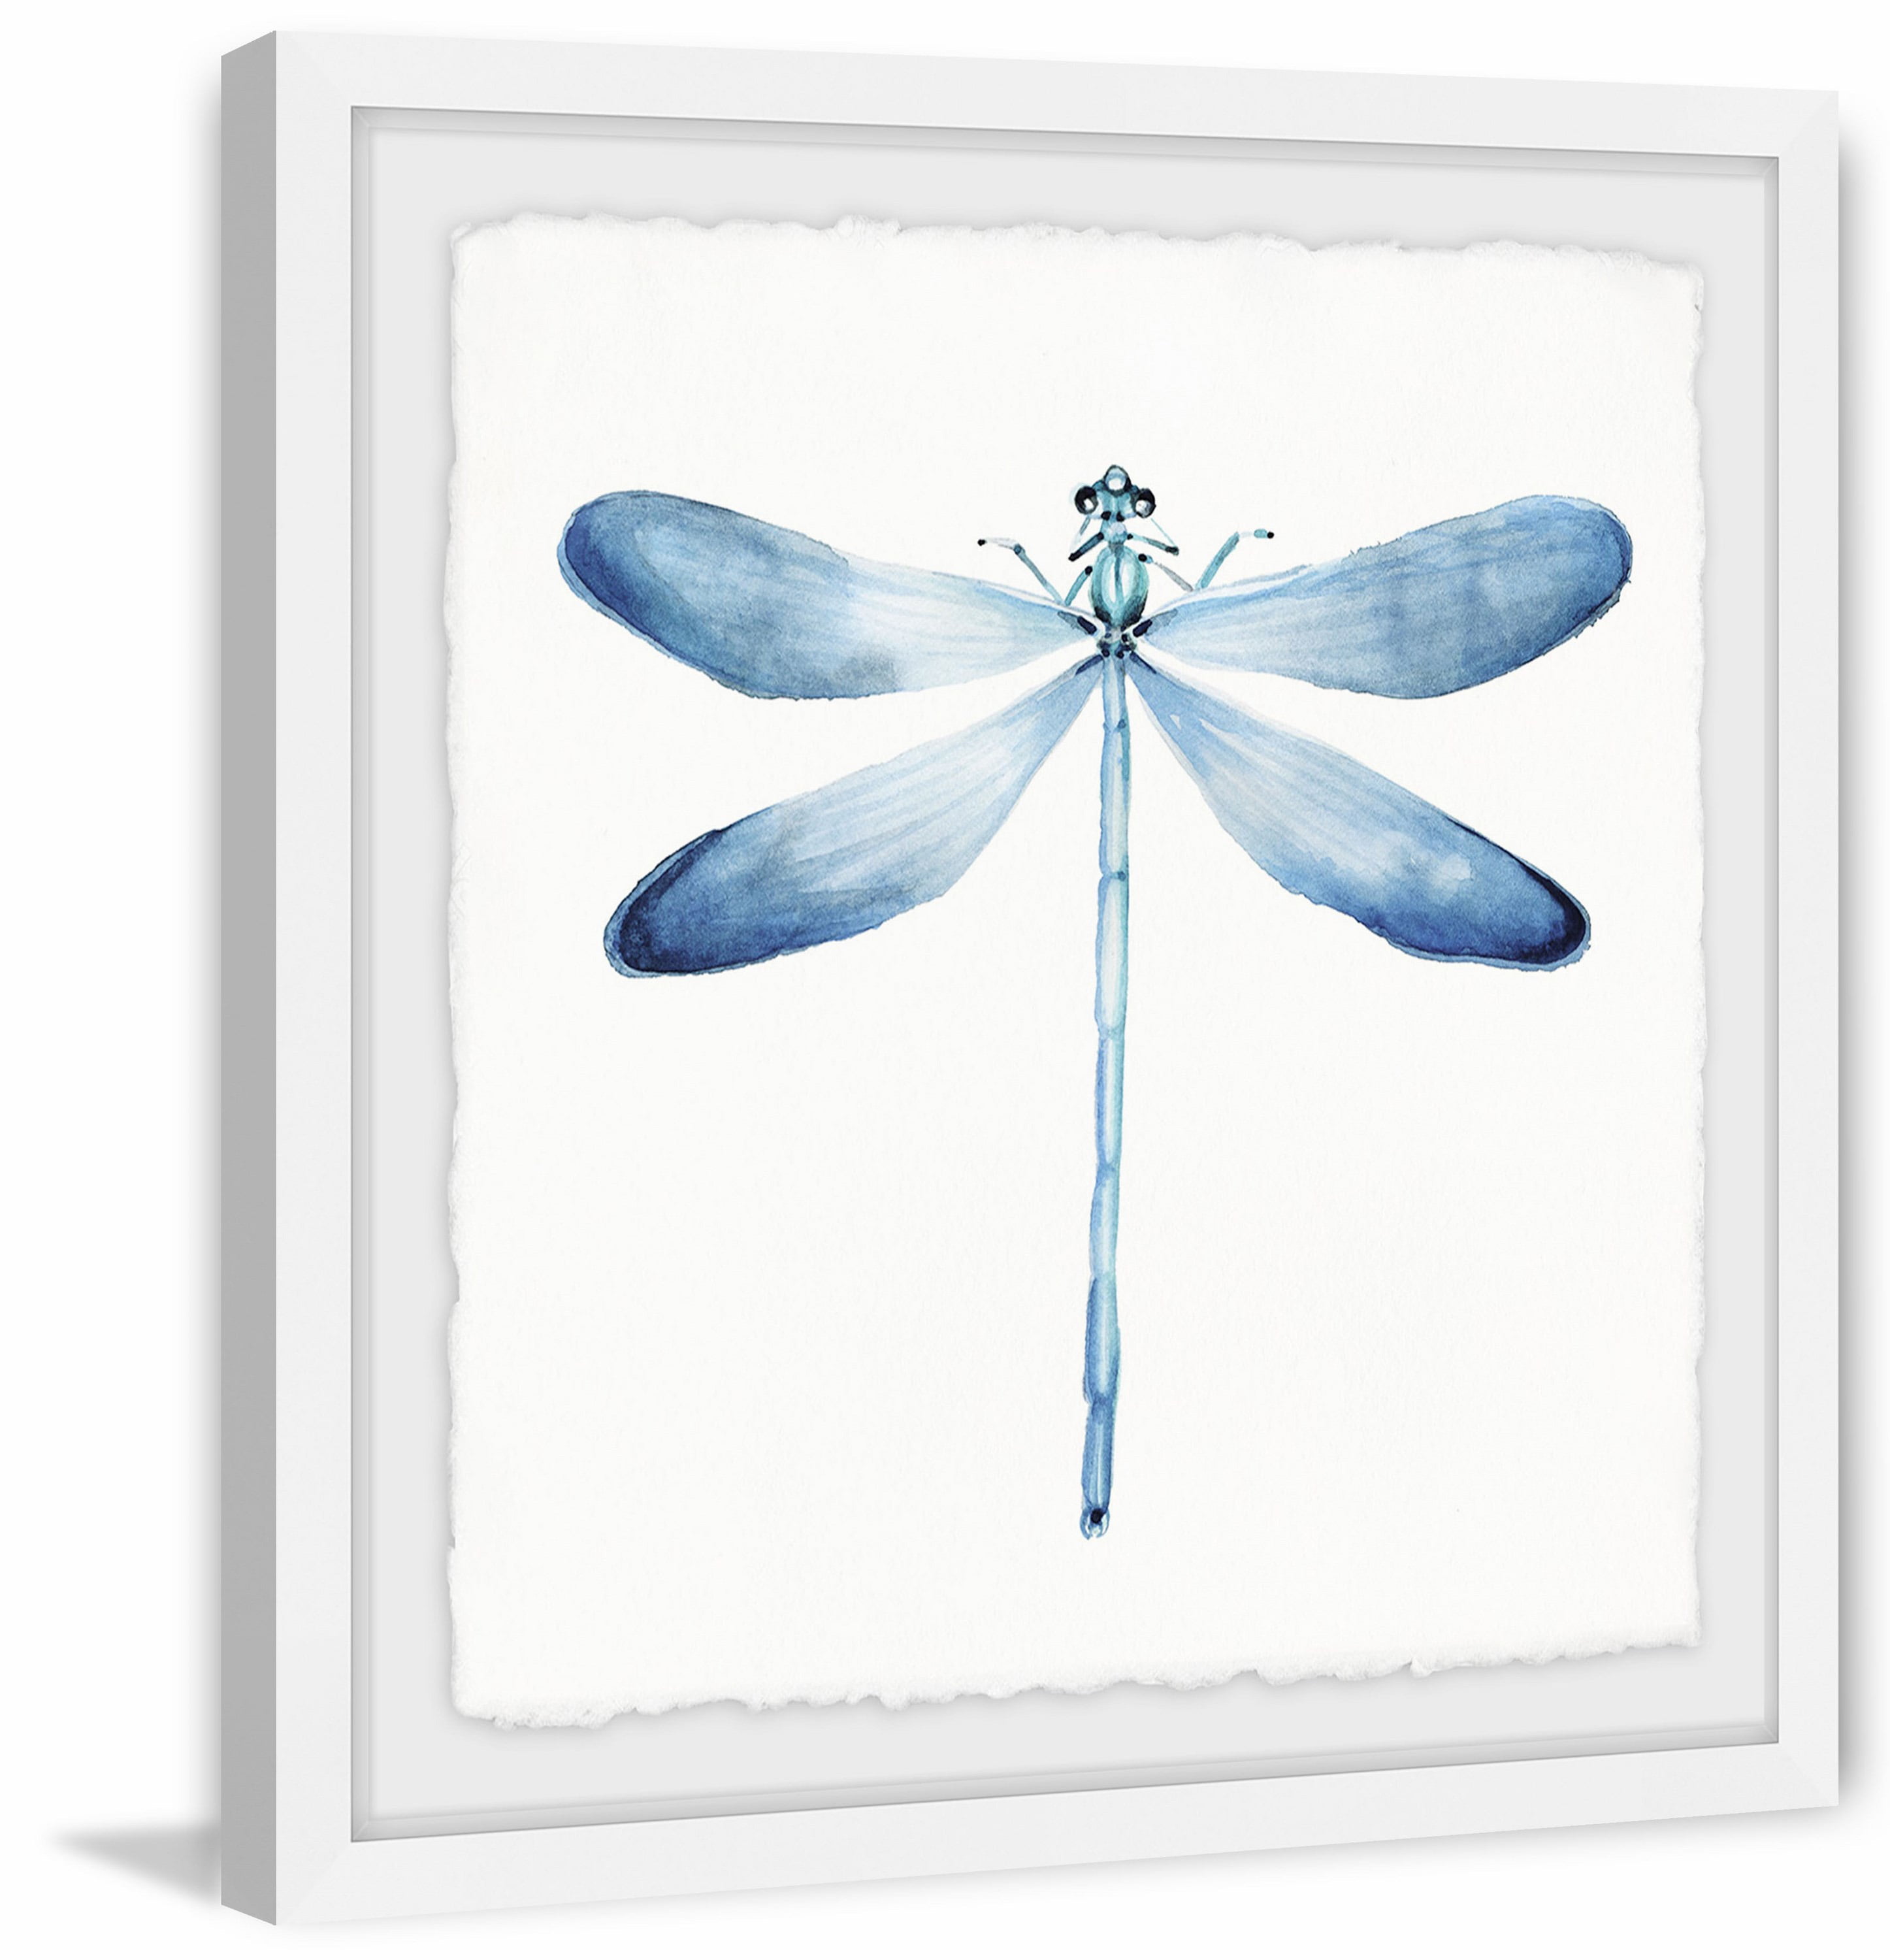 Canvas Painting Dragonfly With God All Things Are Possible Canvas Wall Art Decor Gift For Friends Gift For Family Home Decor Wall Hanging